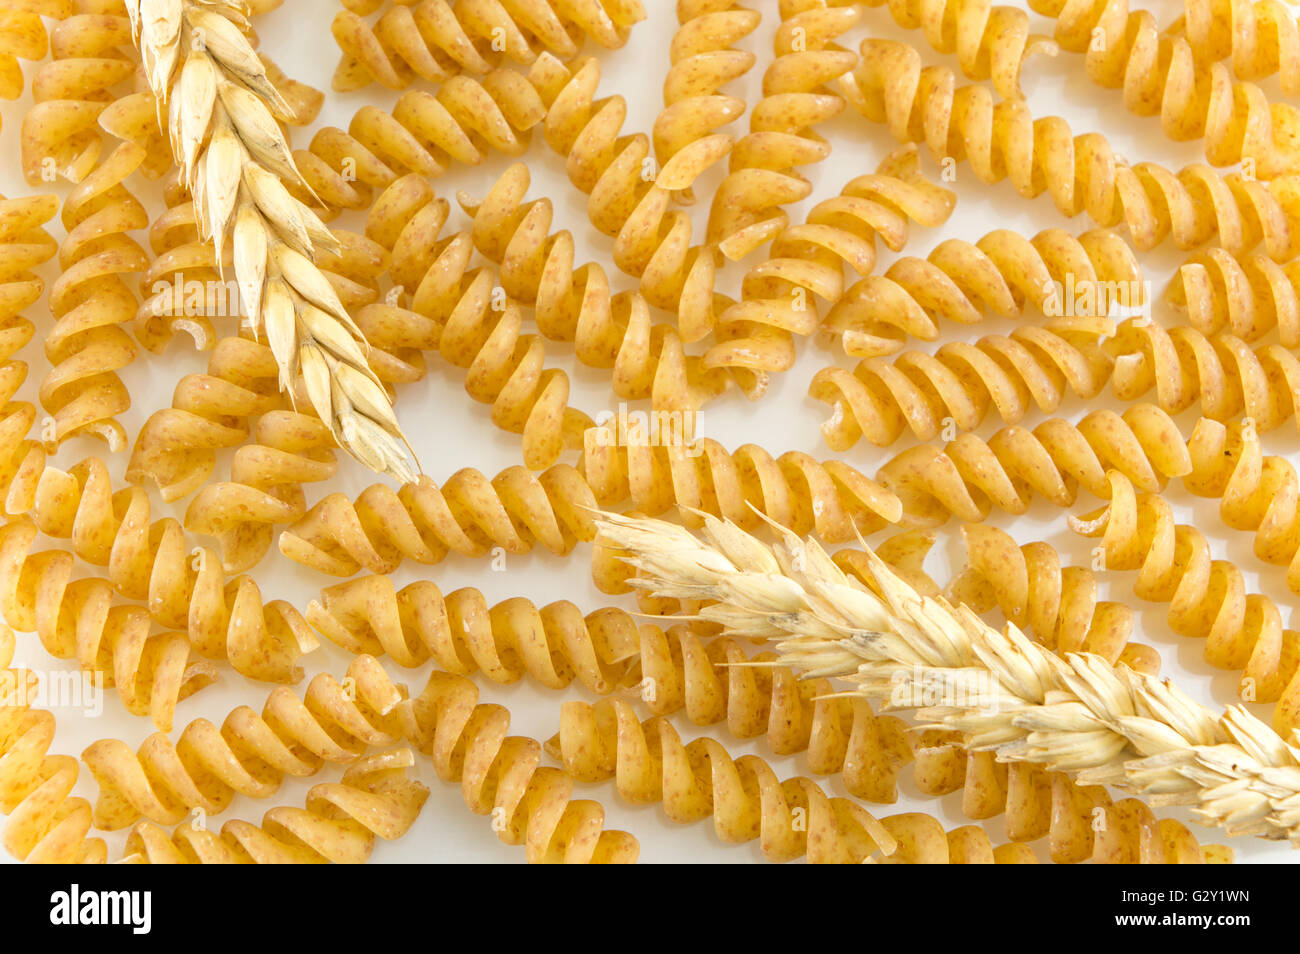 Bunch of golden colored macaroni pasta on a table Stock Photo